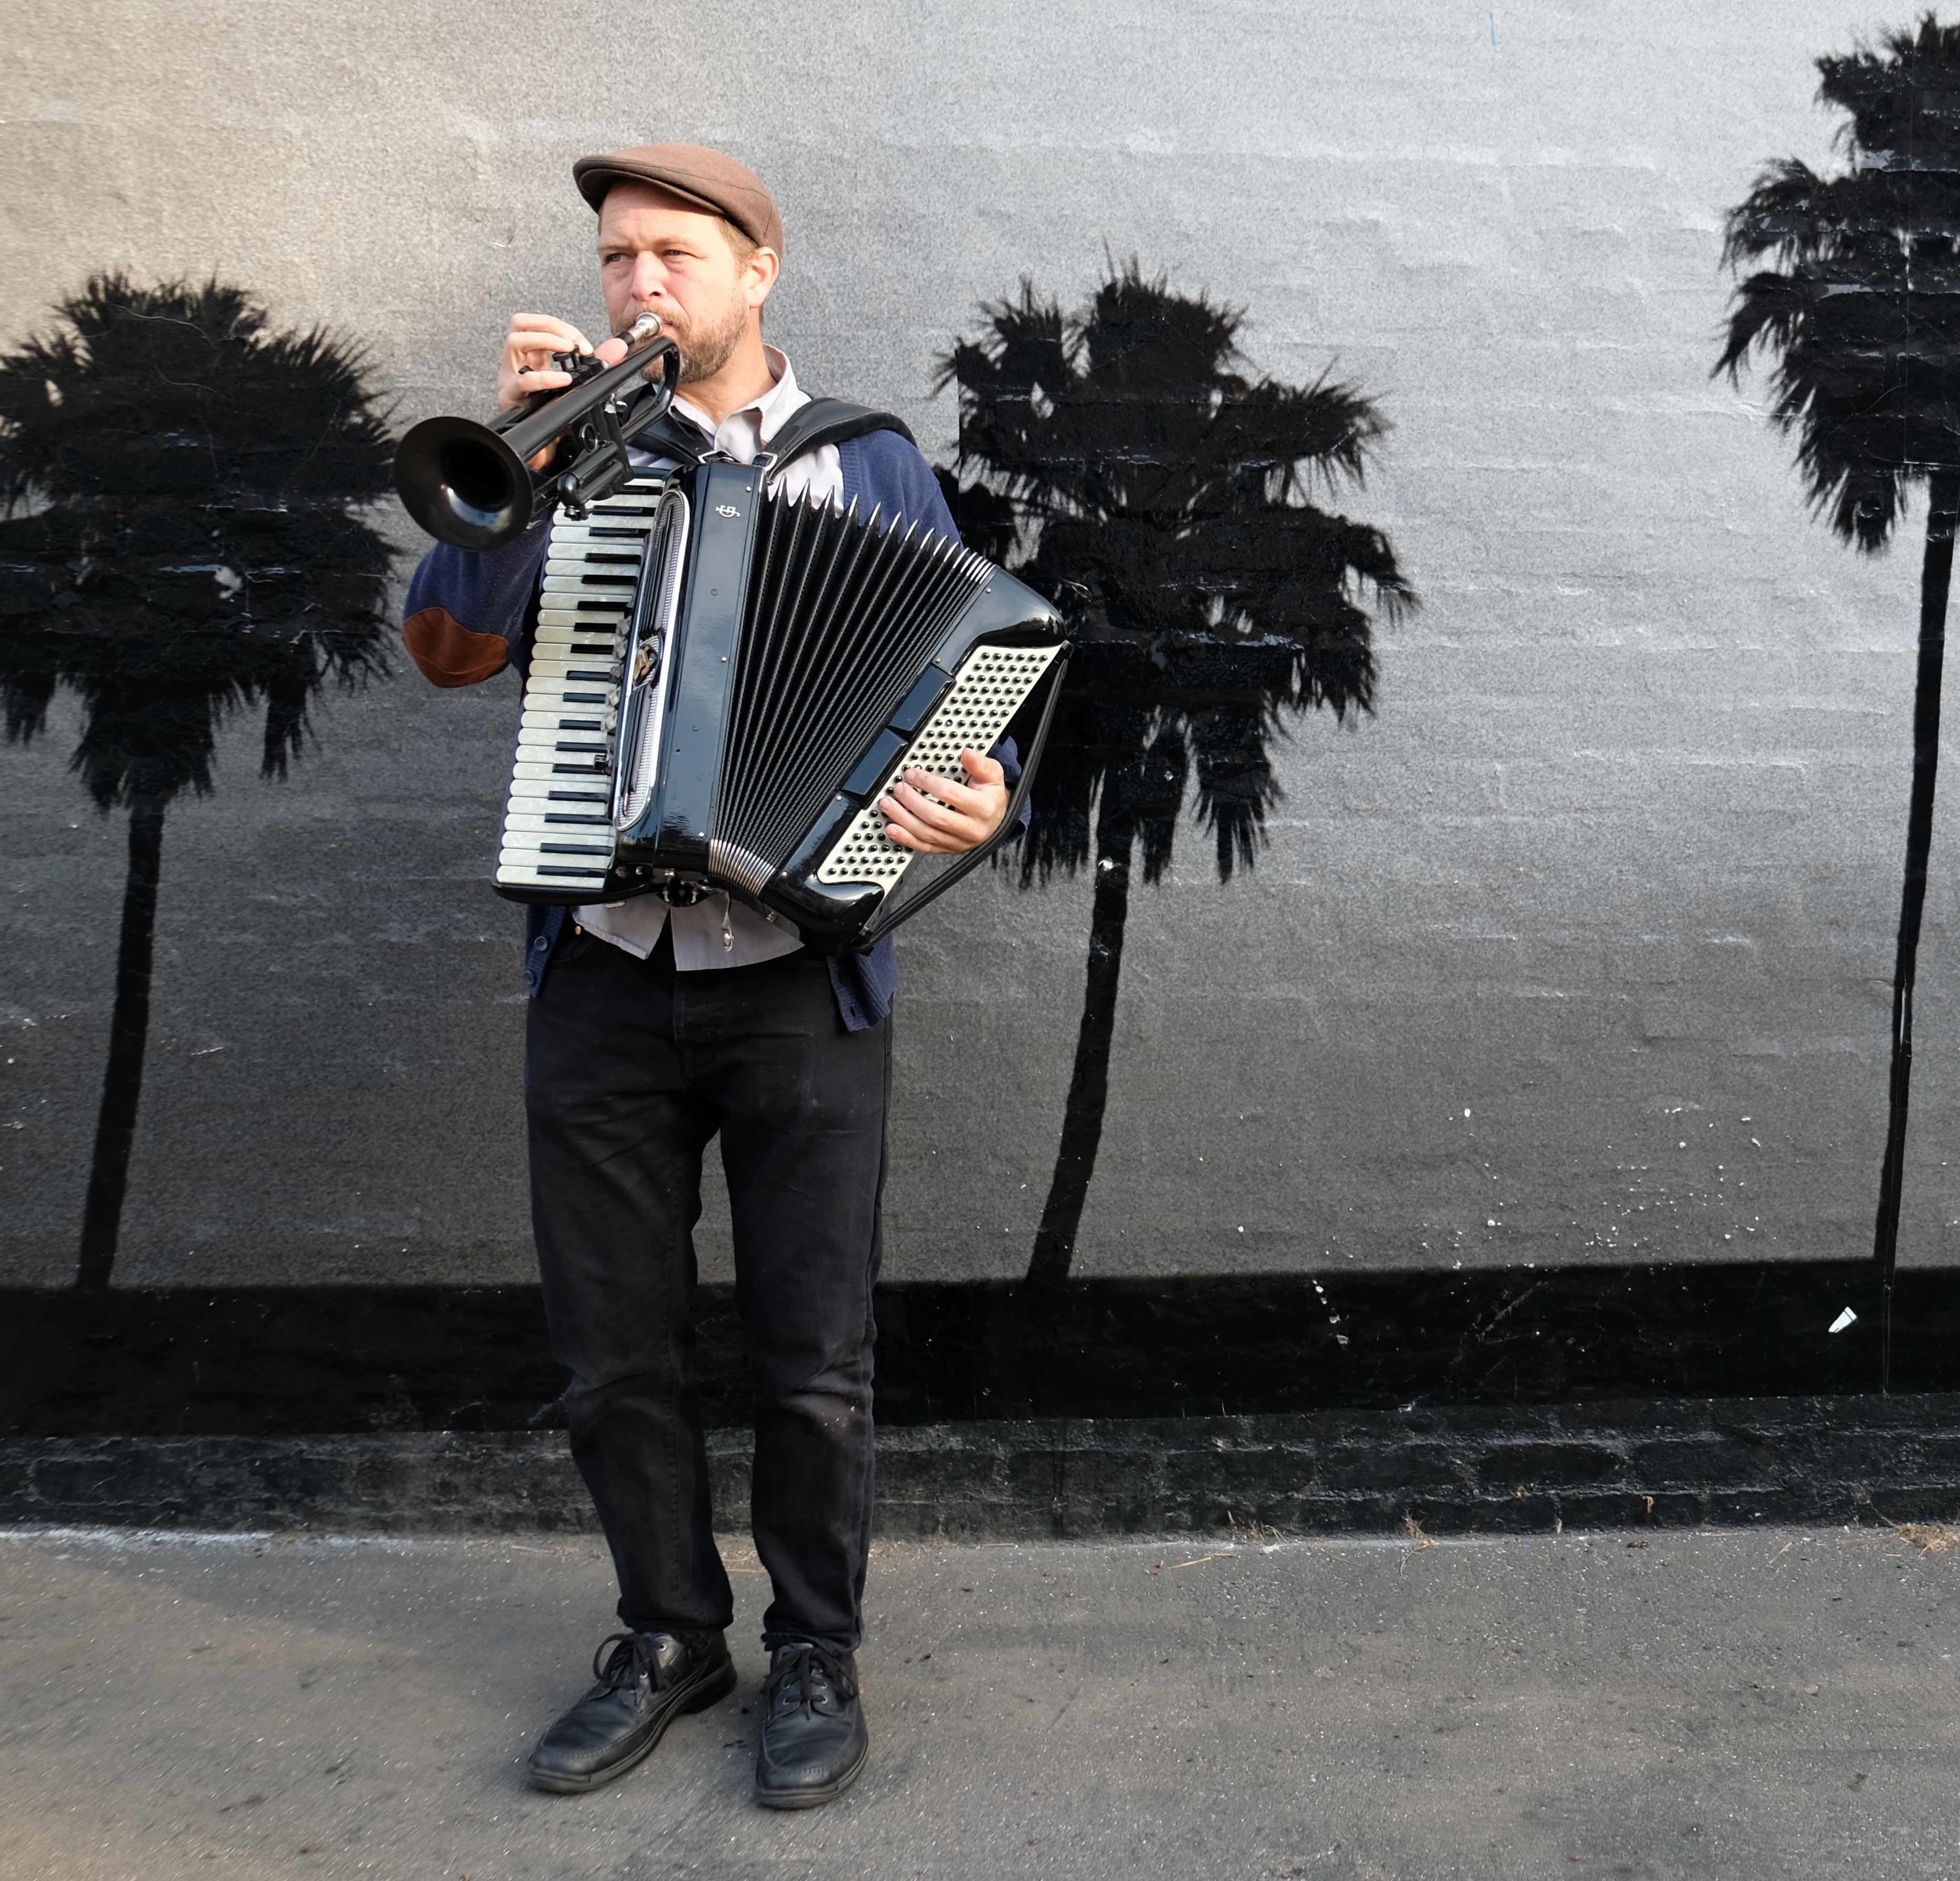 Musician Michael playing accordion and trumpet